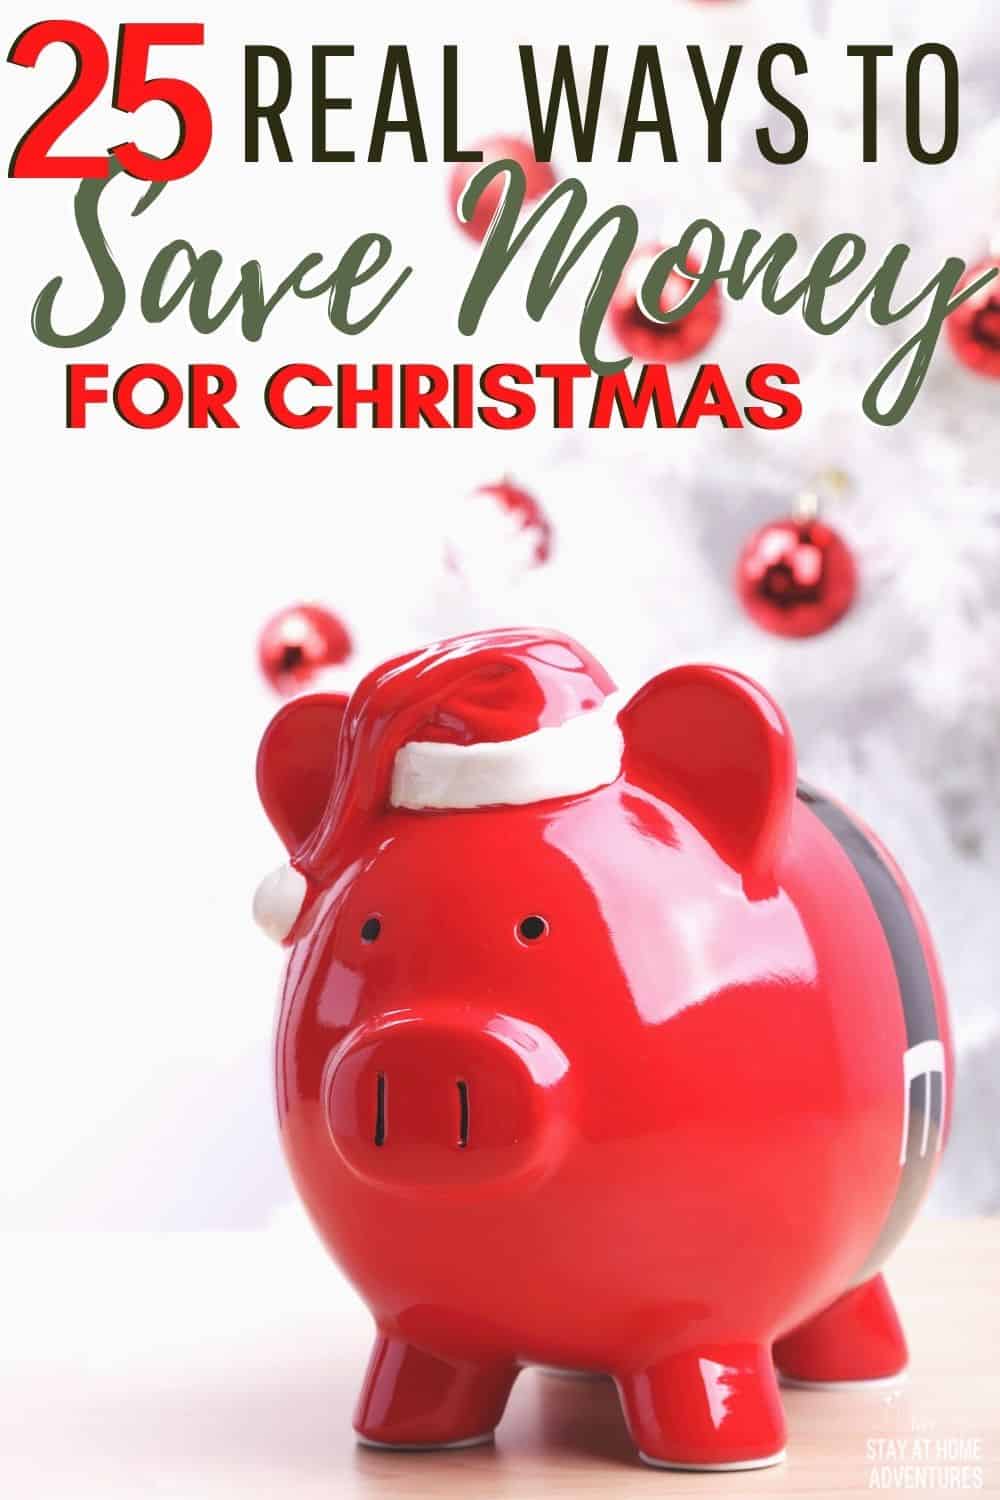 This holiday season makes it less stressful with these 25 REAL ways to save money for Christmas you can start doing right now. via @mystayathome